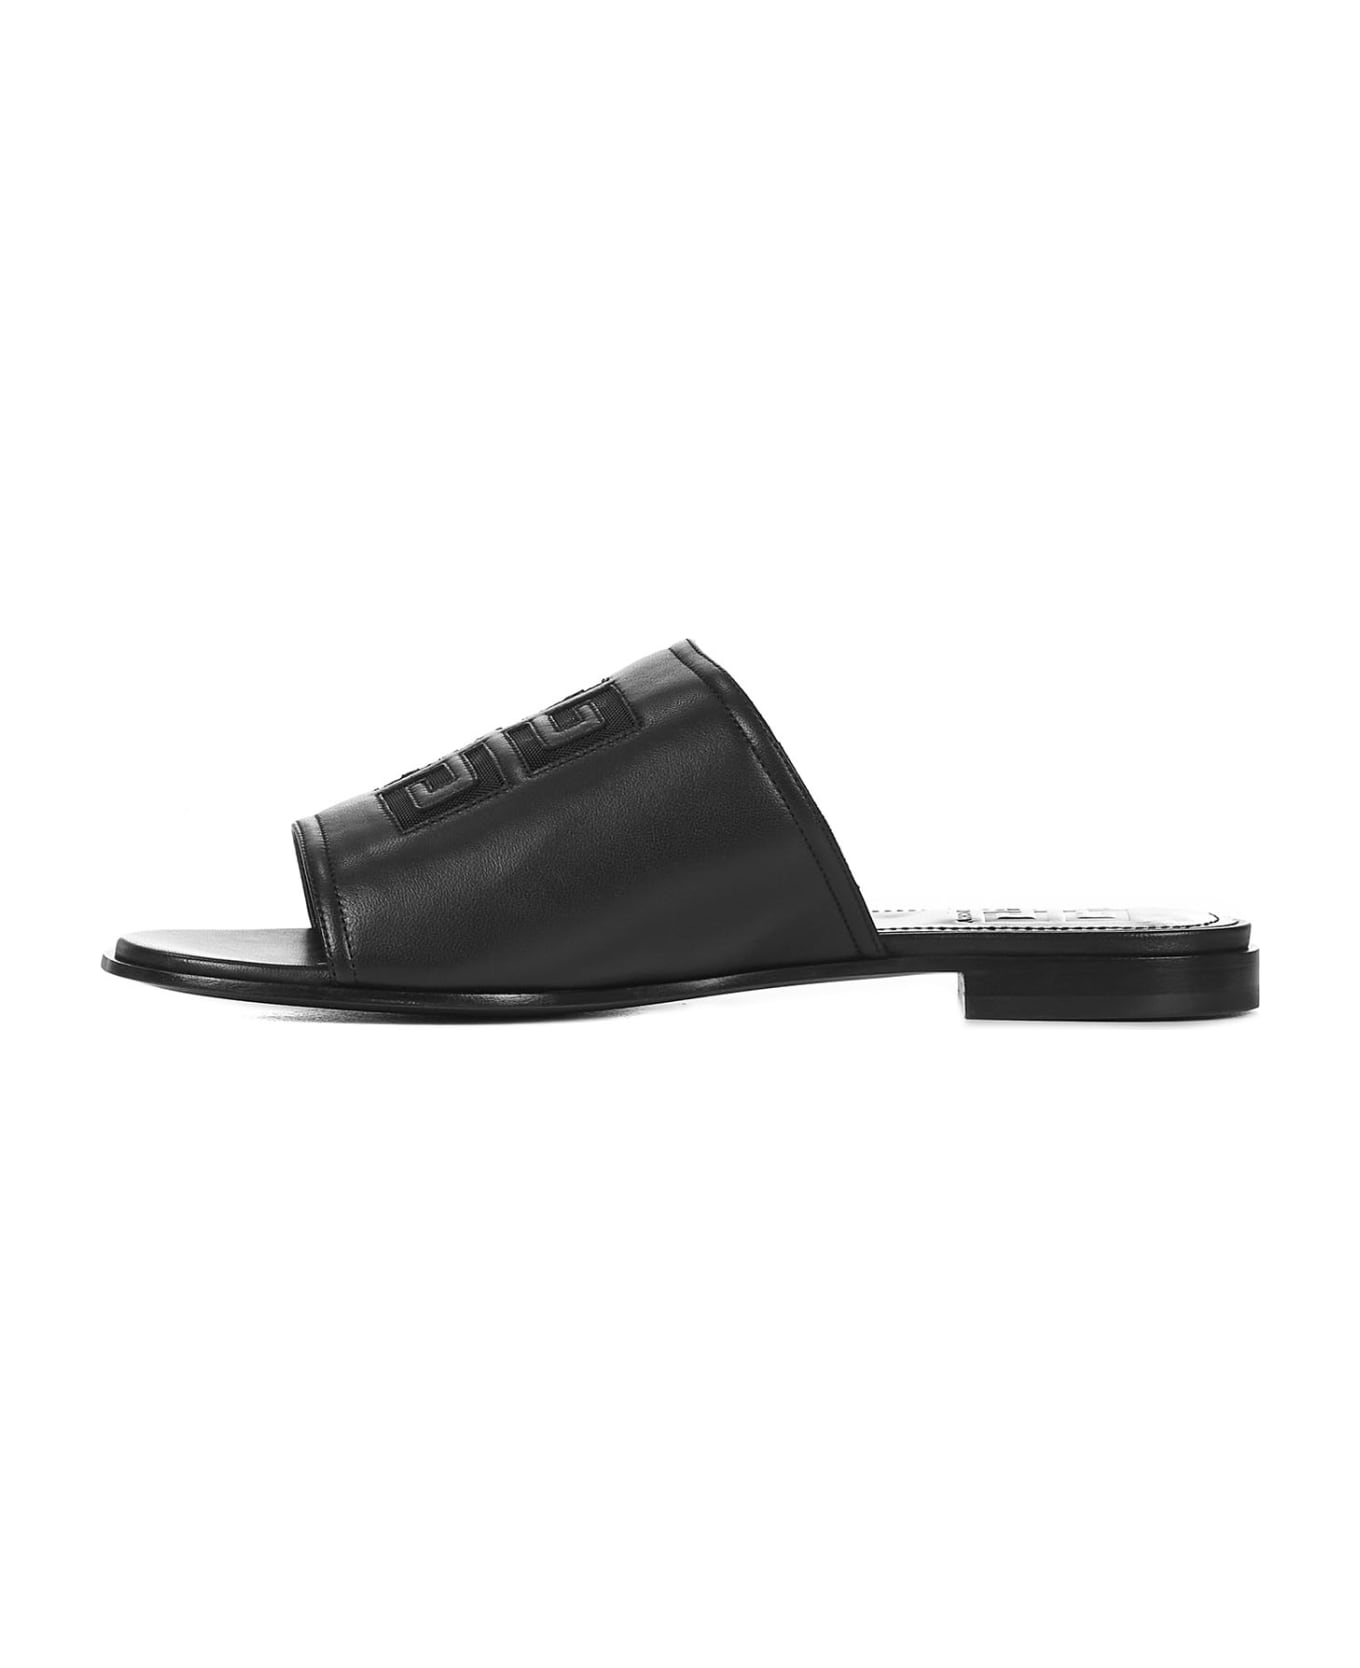 Givenchy Nappa Leather 4g Slippers - Black